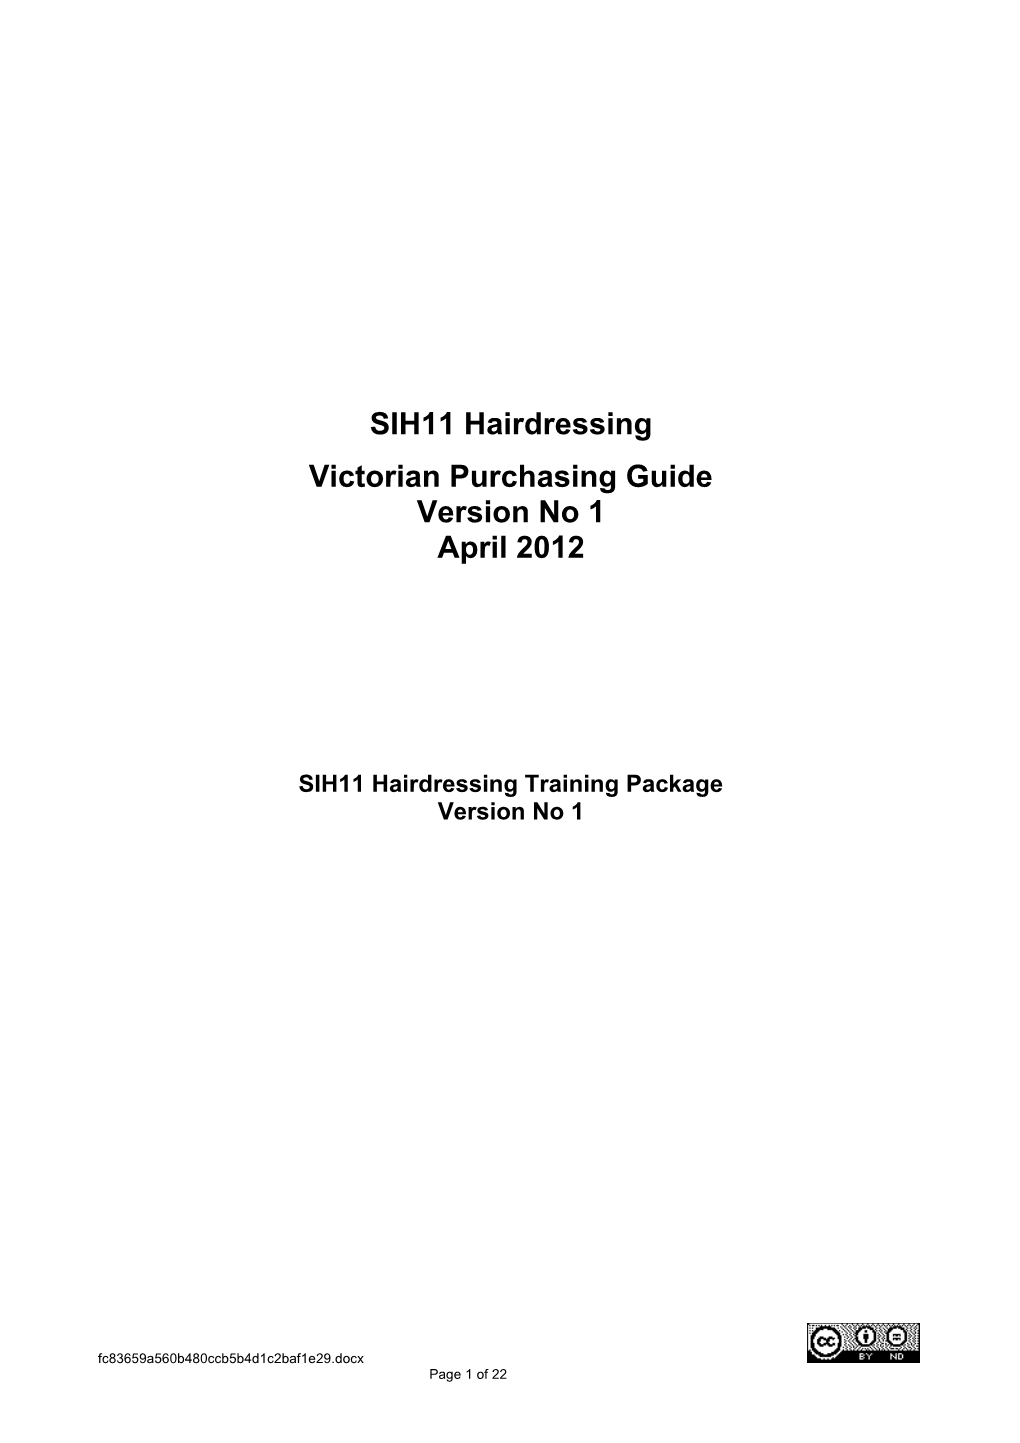 Victorian Purchasing Guide for SIH11 Hairdressing Version 1